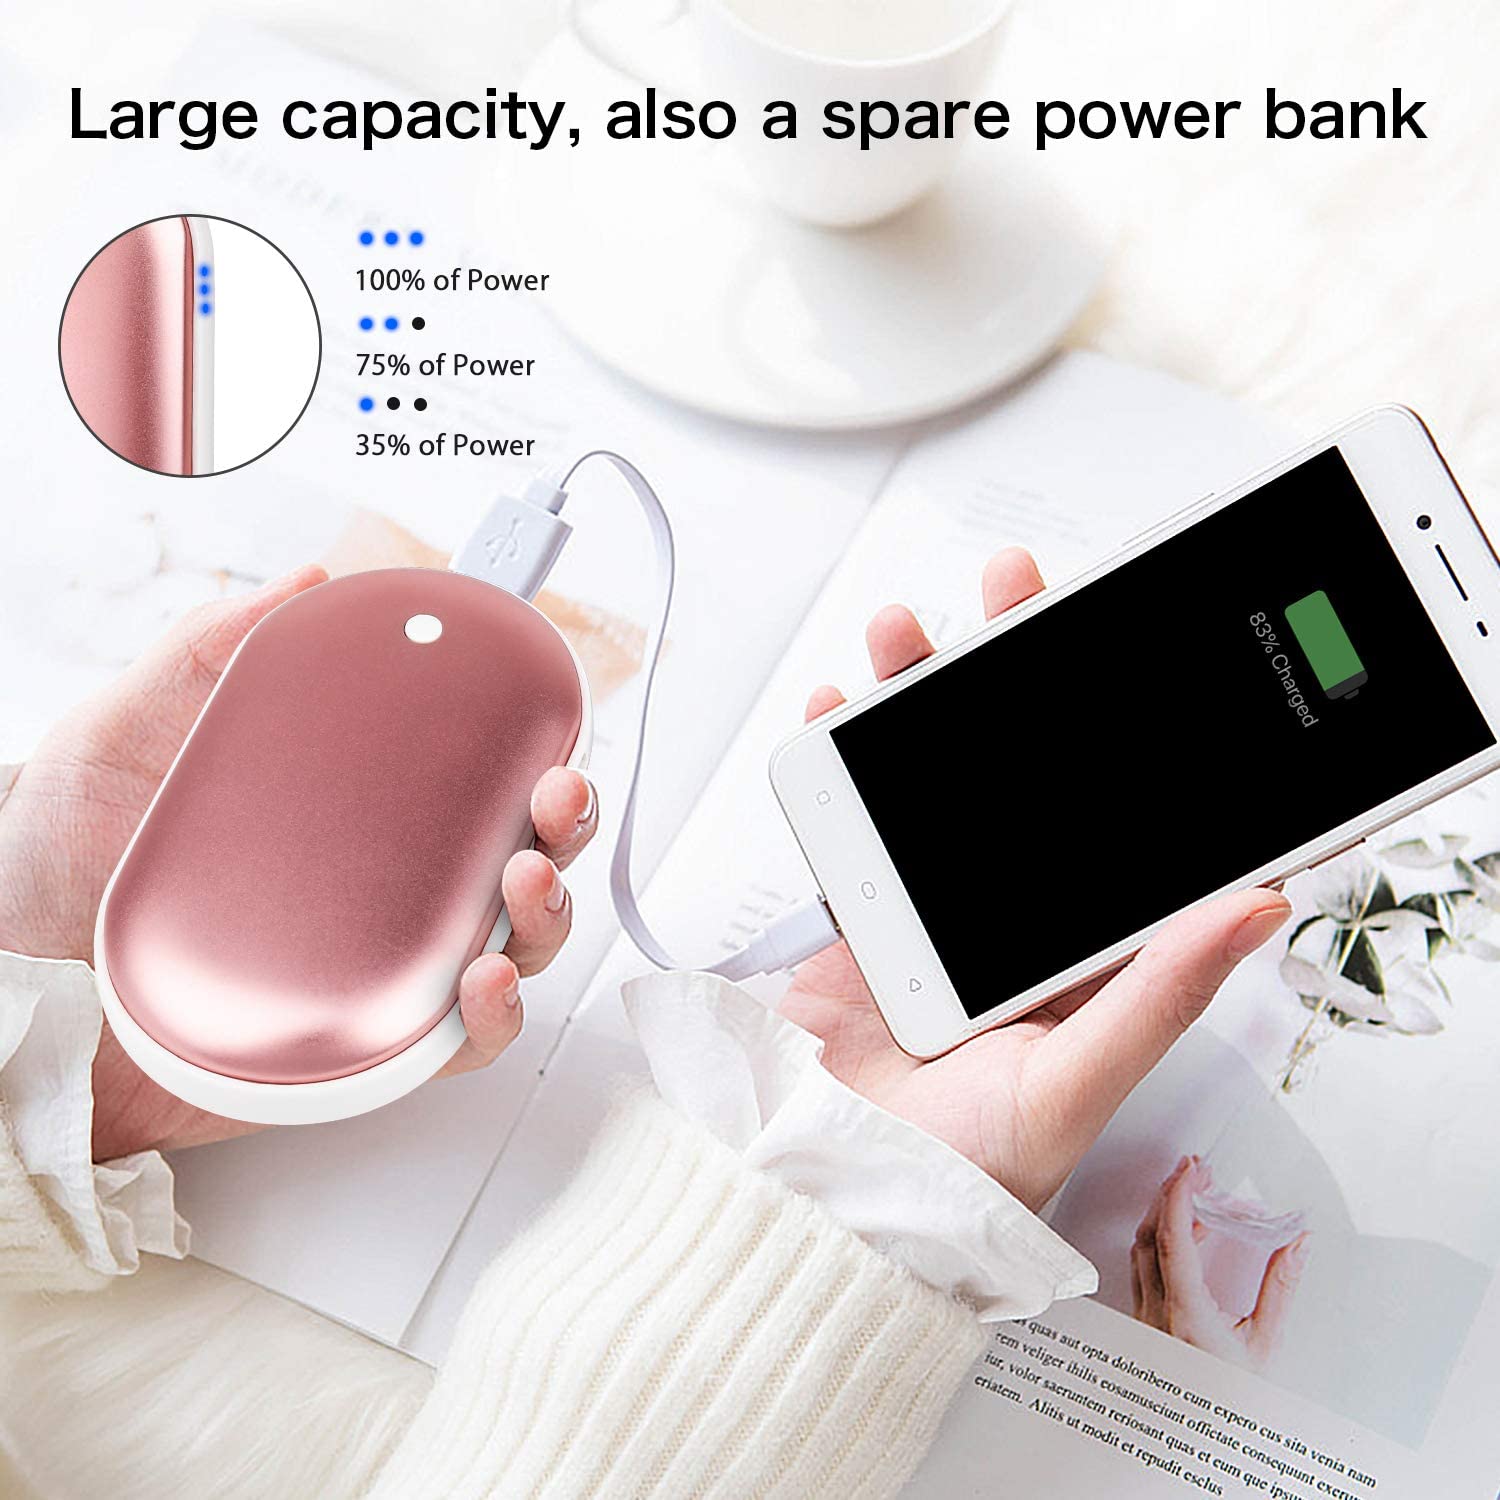 Skygenius Rechargeable USB Battery Powered Hand Warmer 5000mAh White